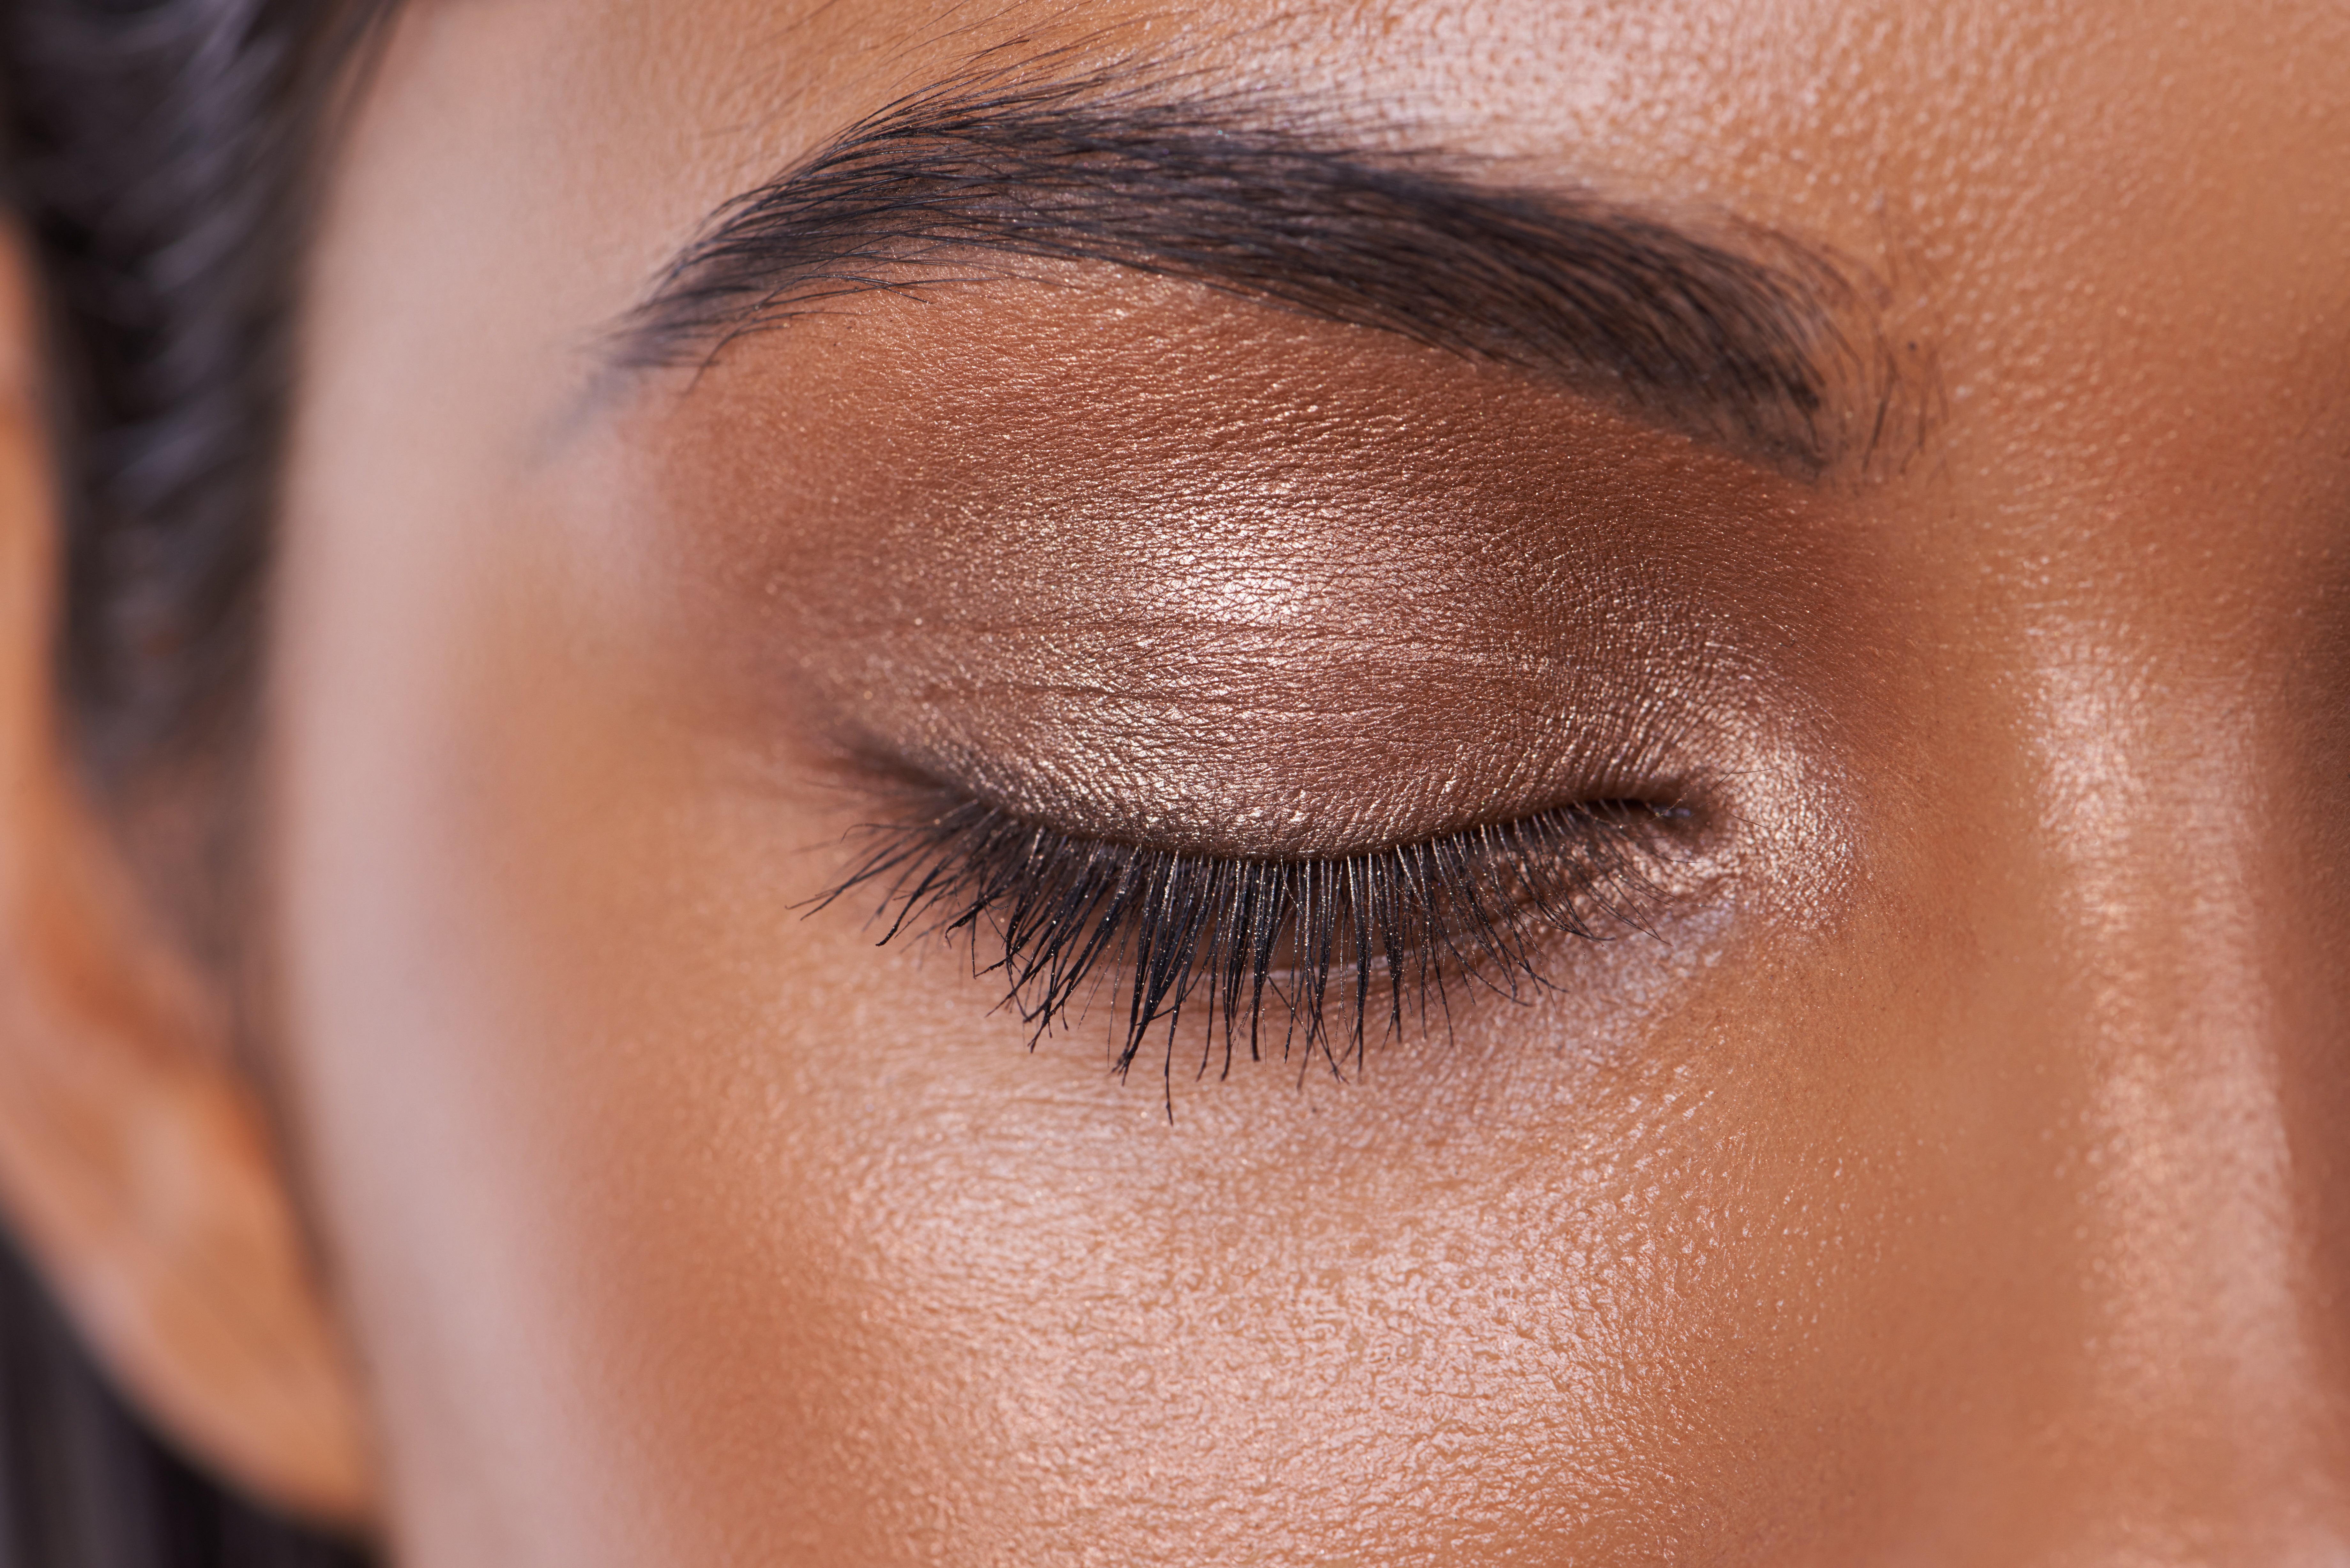 Want to Look Younger? Your Eyebrows May Be the Key, Study Says
